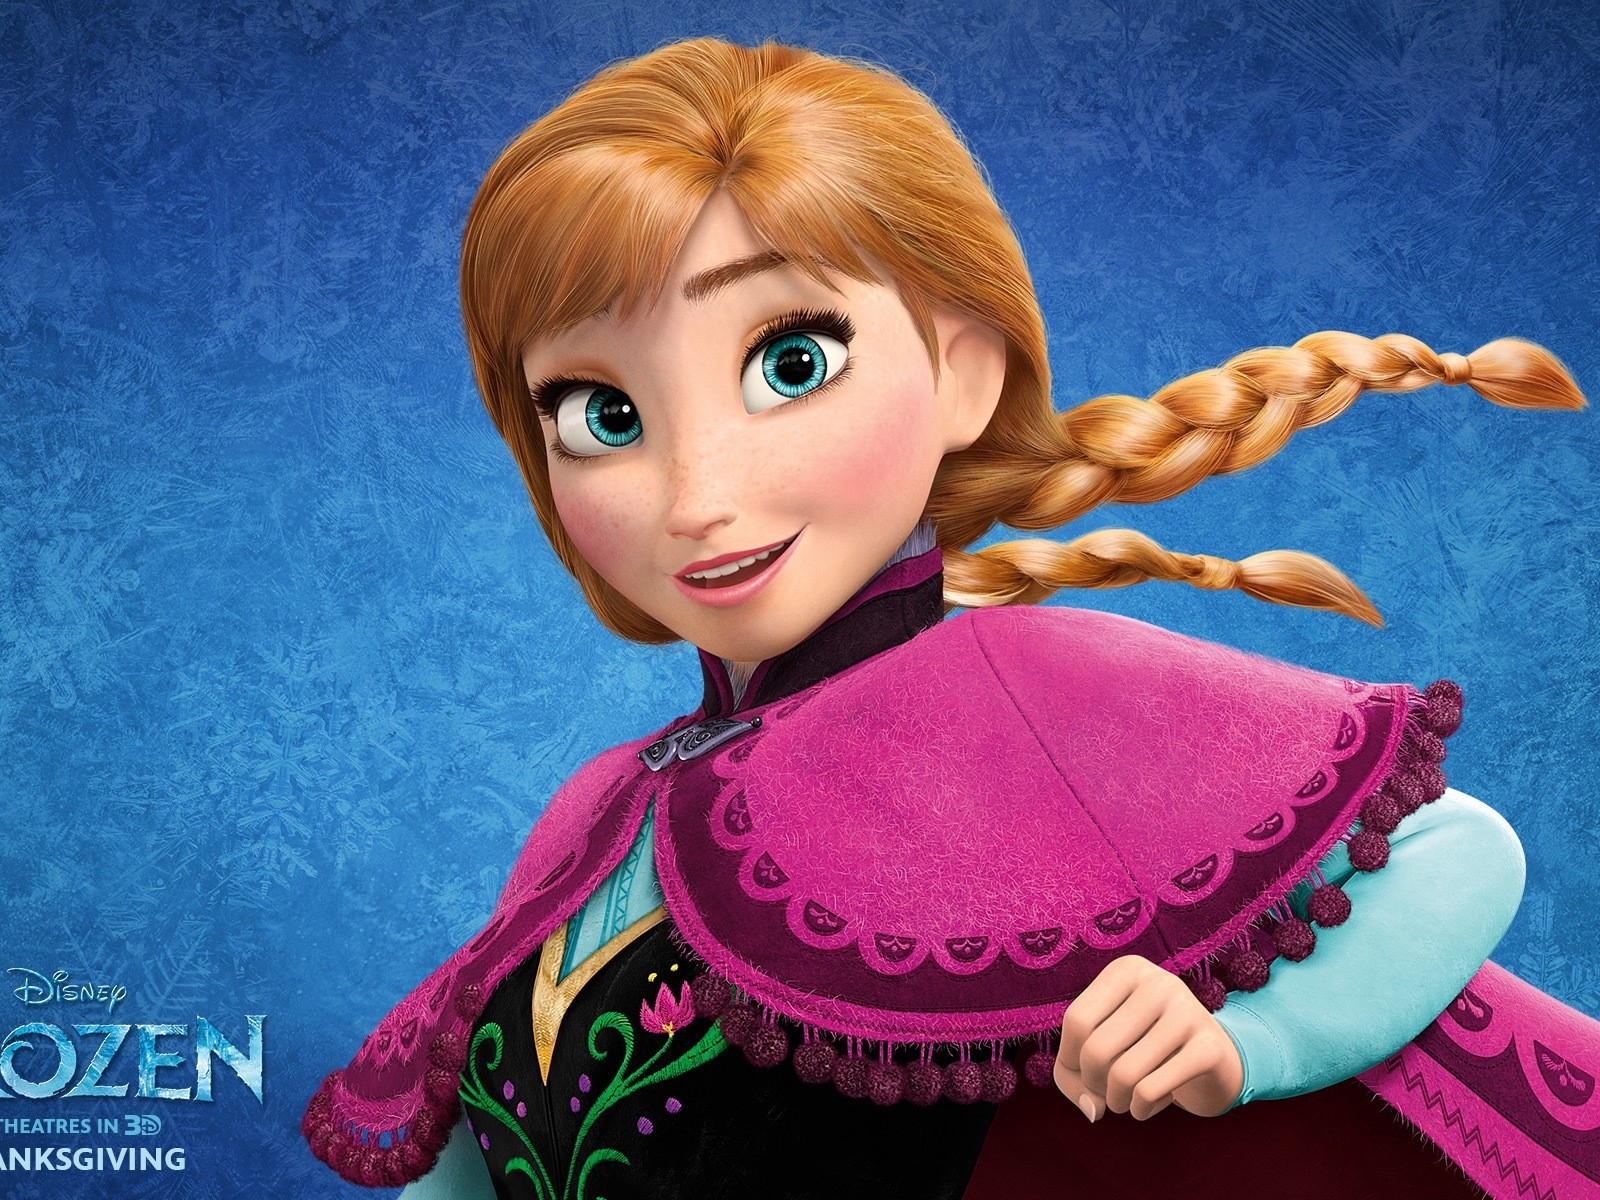 Frozen Movie Character for 1600 x 1200 resolution